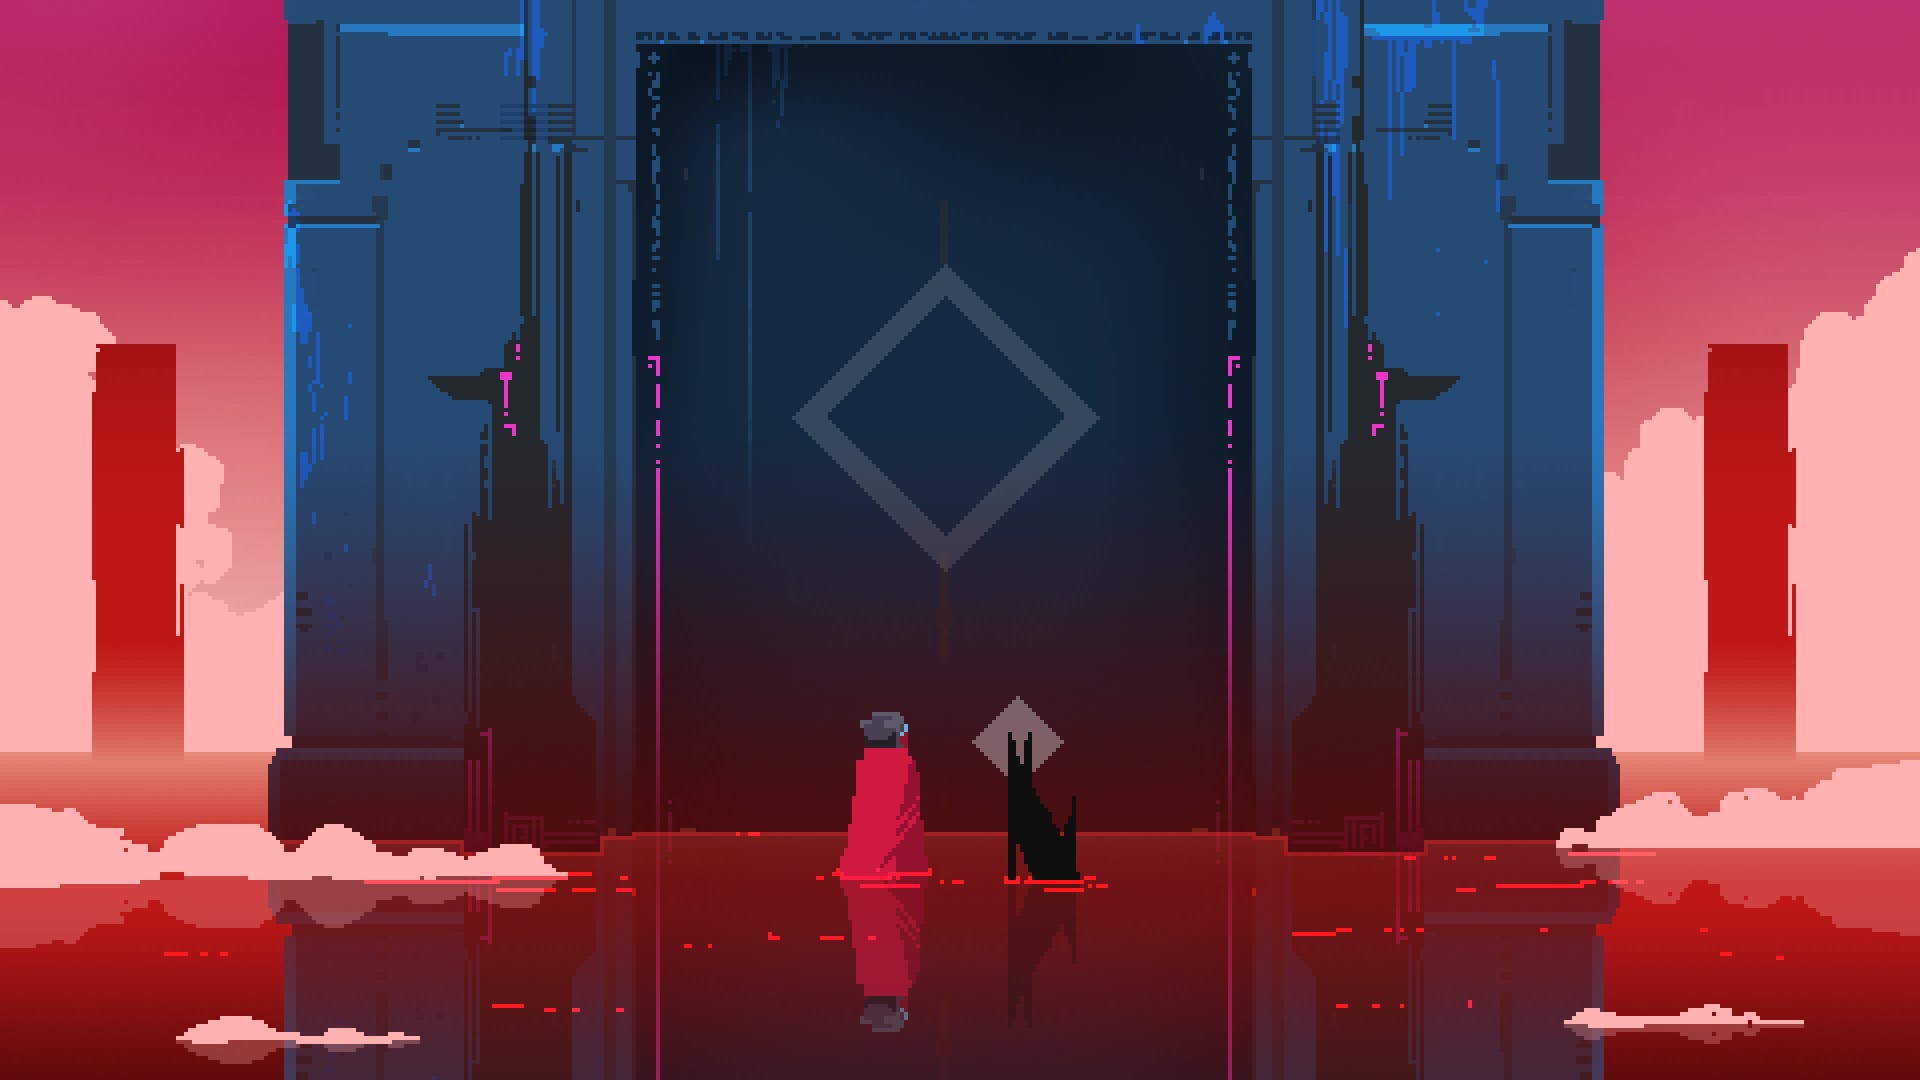 hyper light drifter wallpaper,red,stage,blue,pink,theatrical scenery